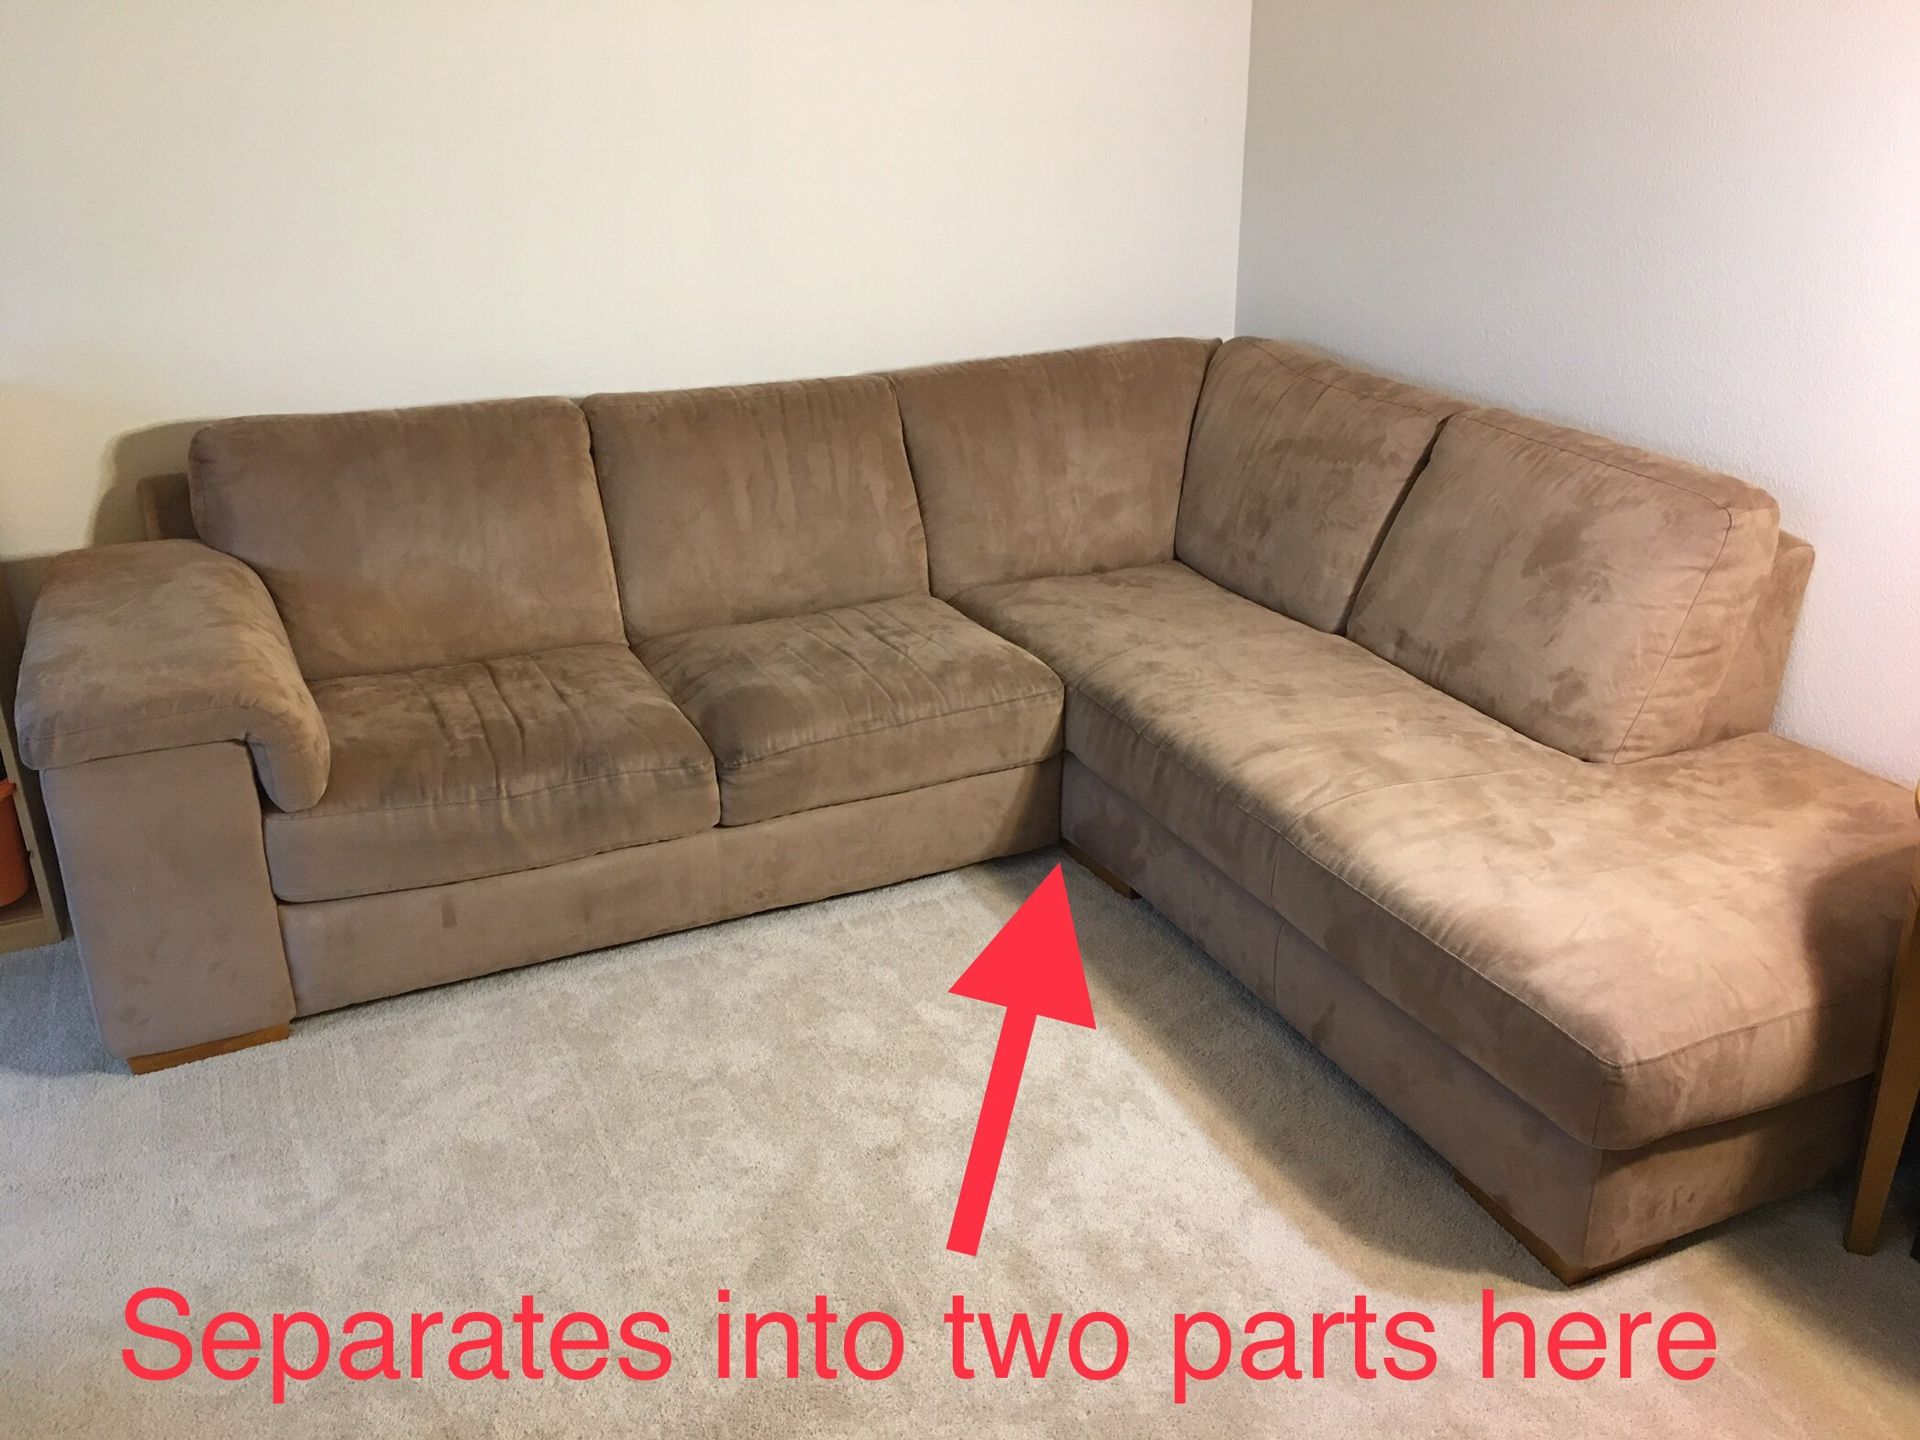 *PENDING* FREE L-shape sectional couch